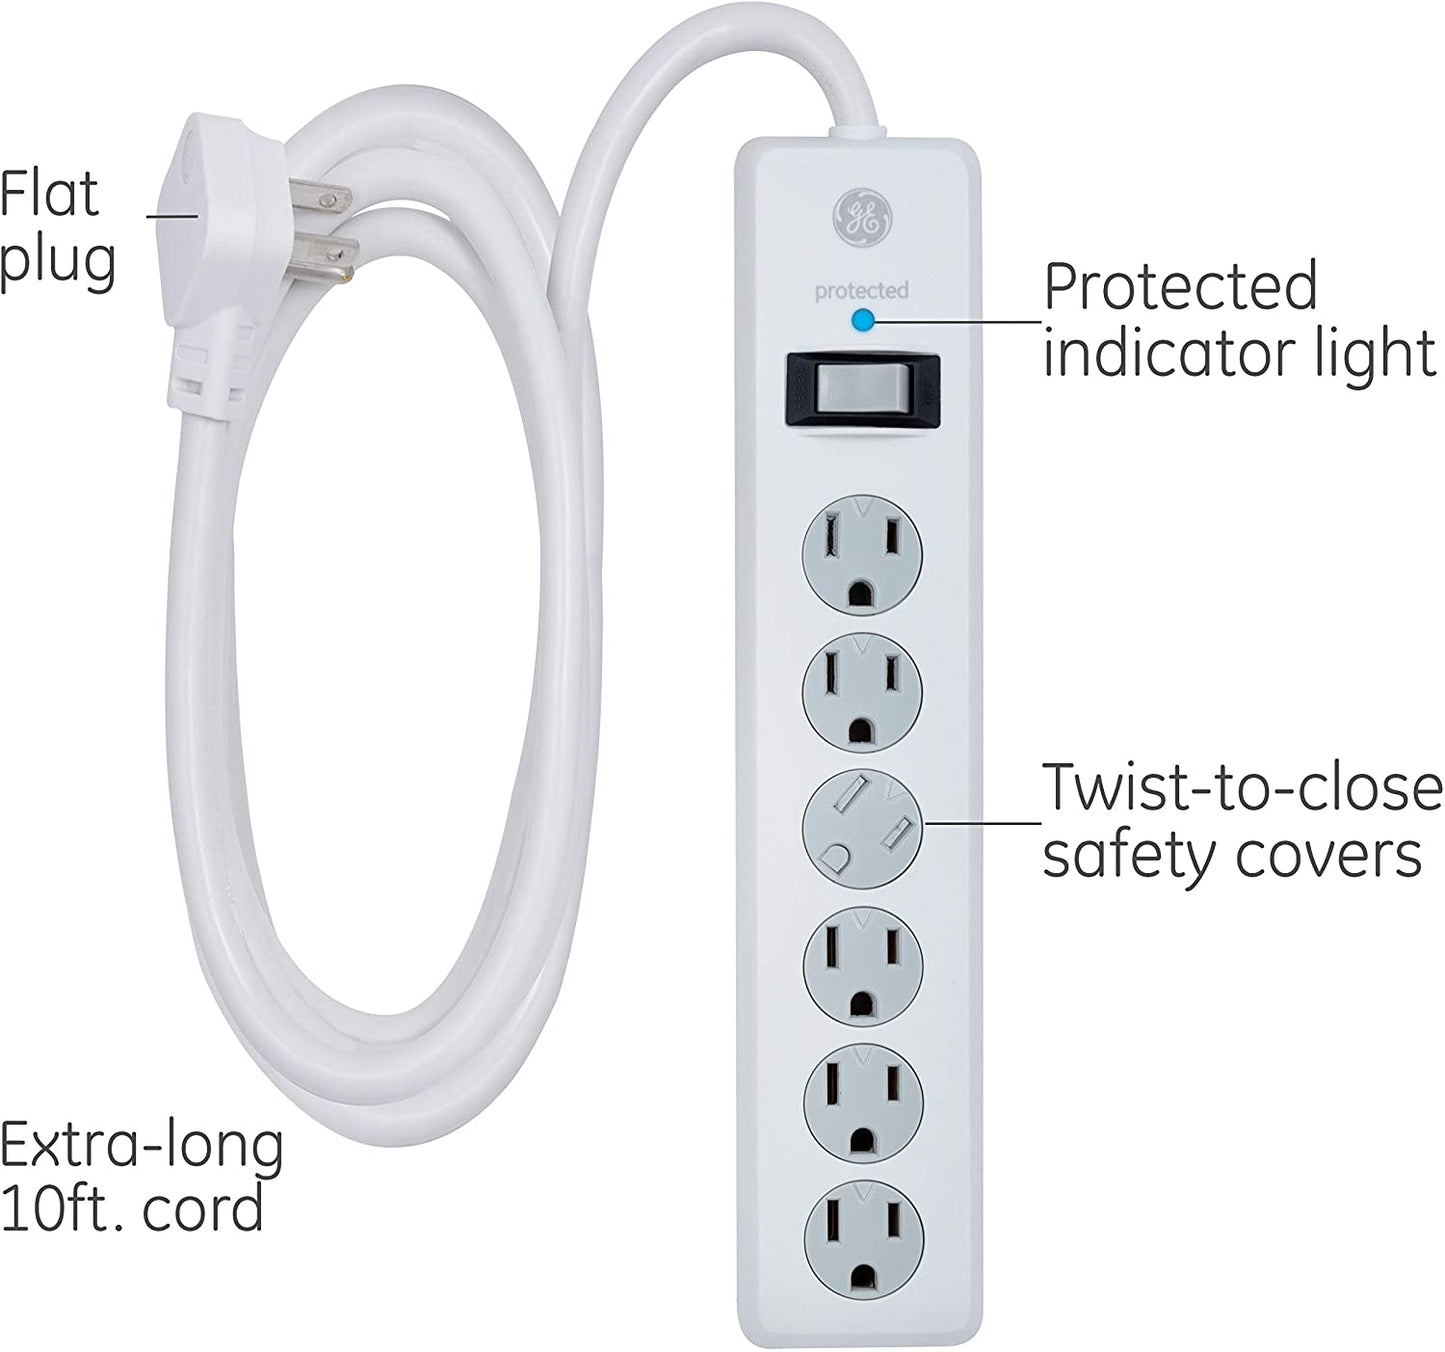 6-Outlet Sur Protector, 10 Ft Extension Cord, Power Strip, 800 Joules, Flat Plug, Twist-To-Close Safety Covers, UL Listed, White, 14092